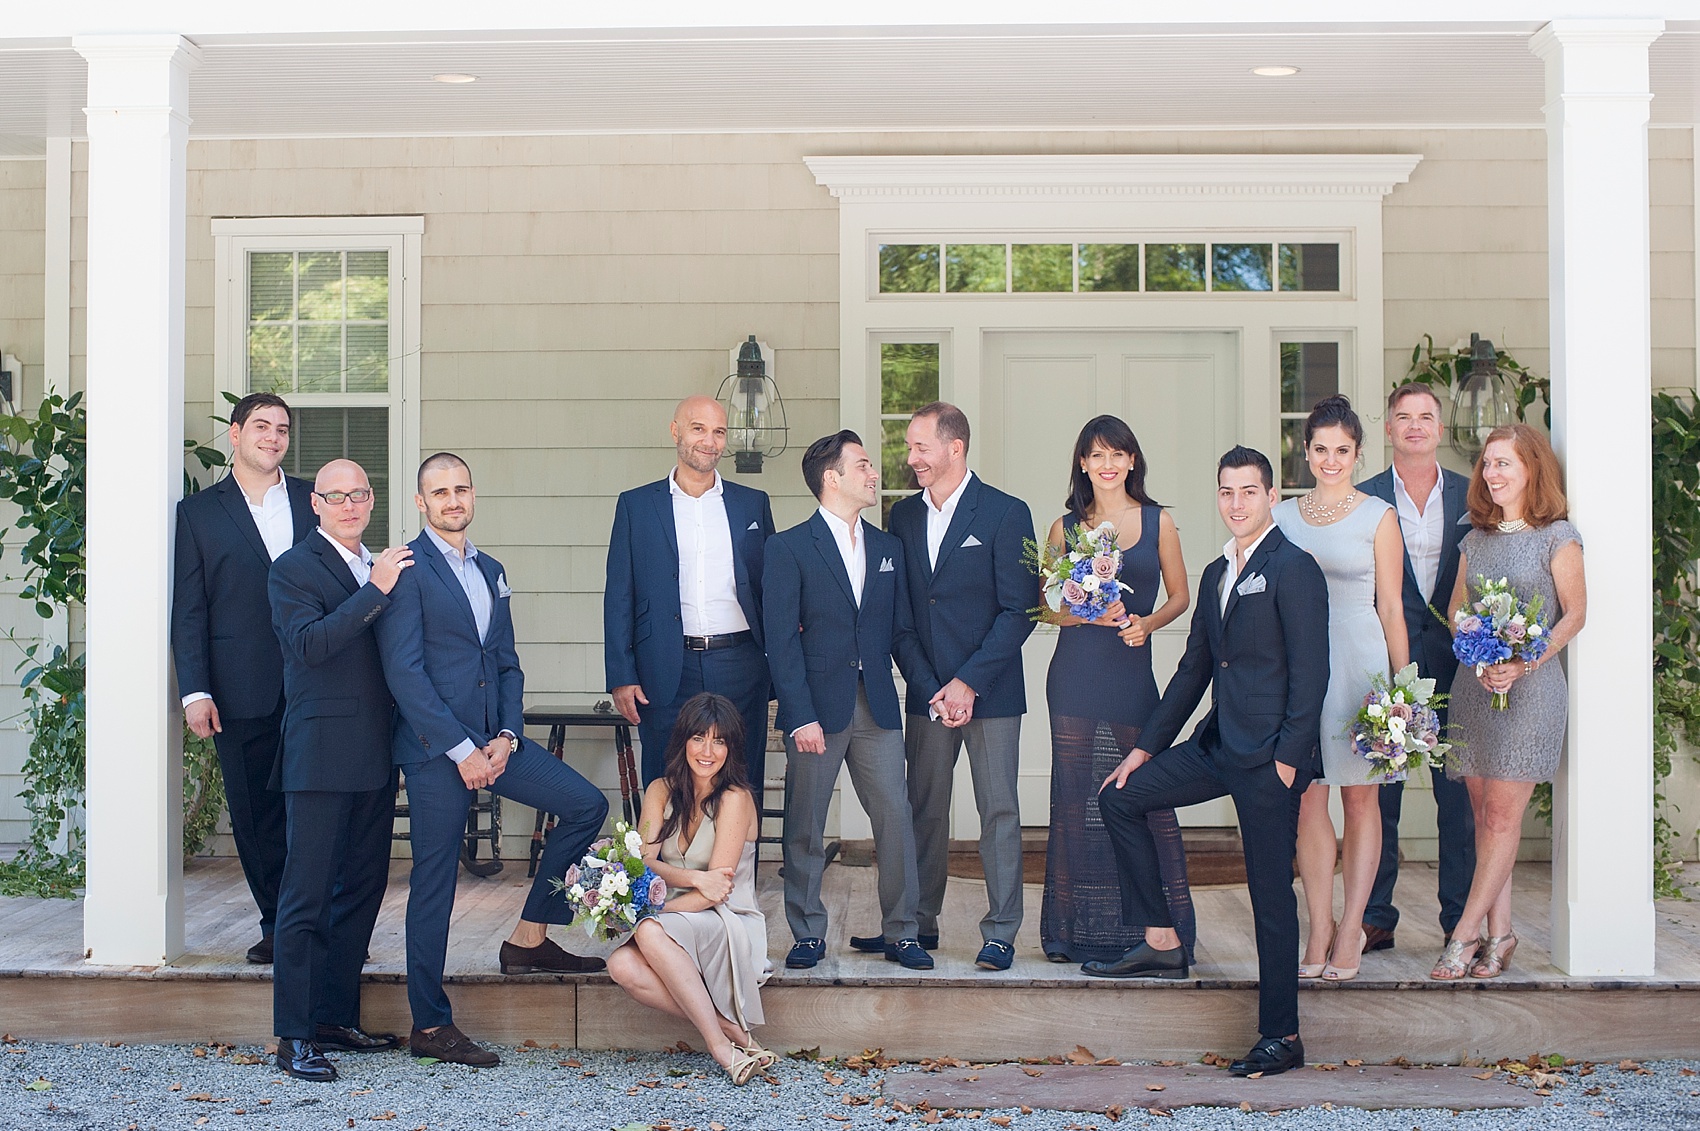 Hamptons, New York same sex wedding party photos at a private residence, by Mikkel Paige Photography.